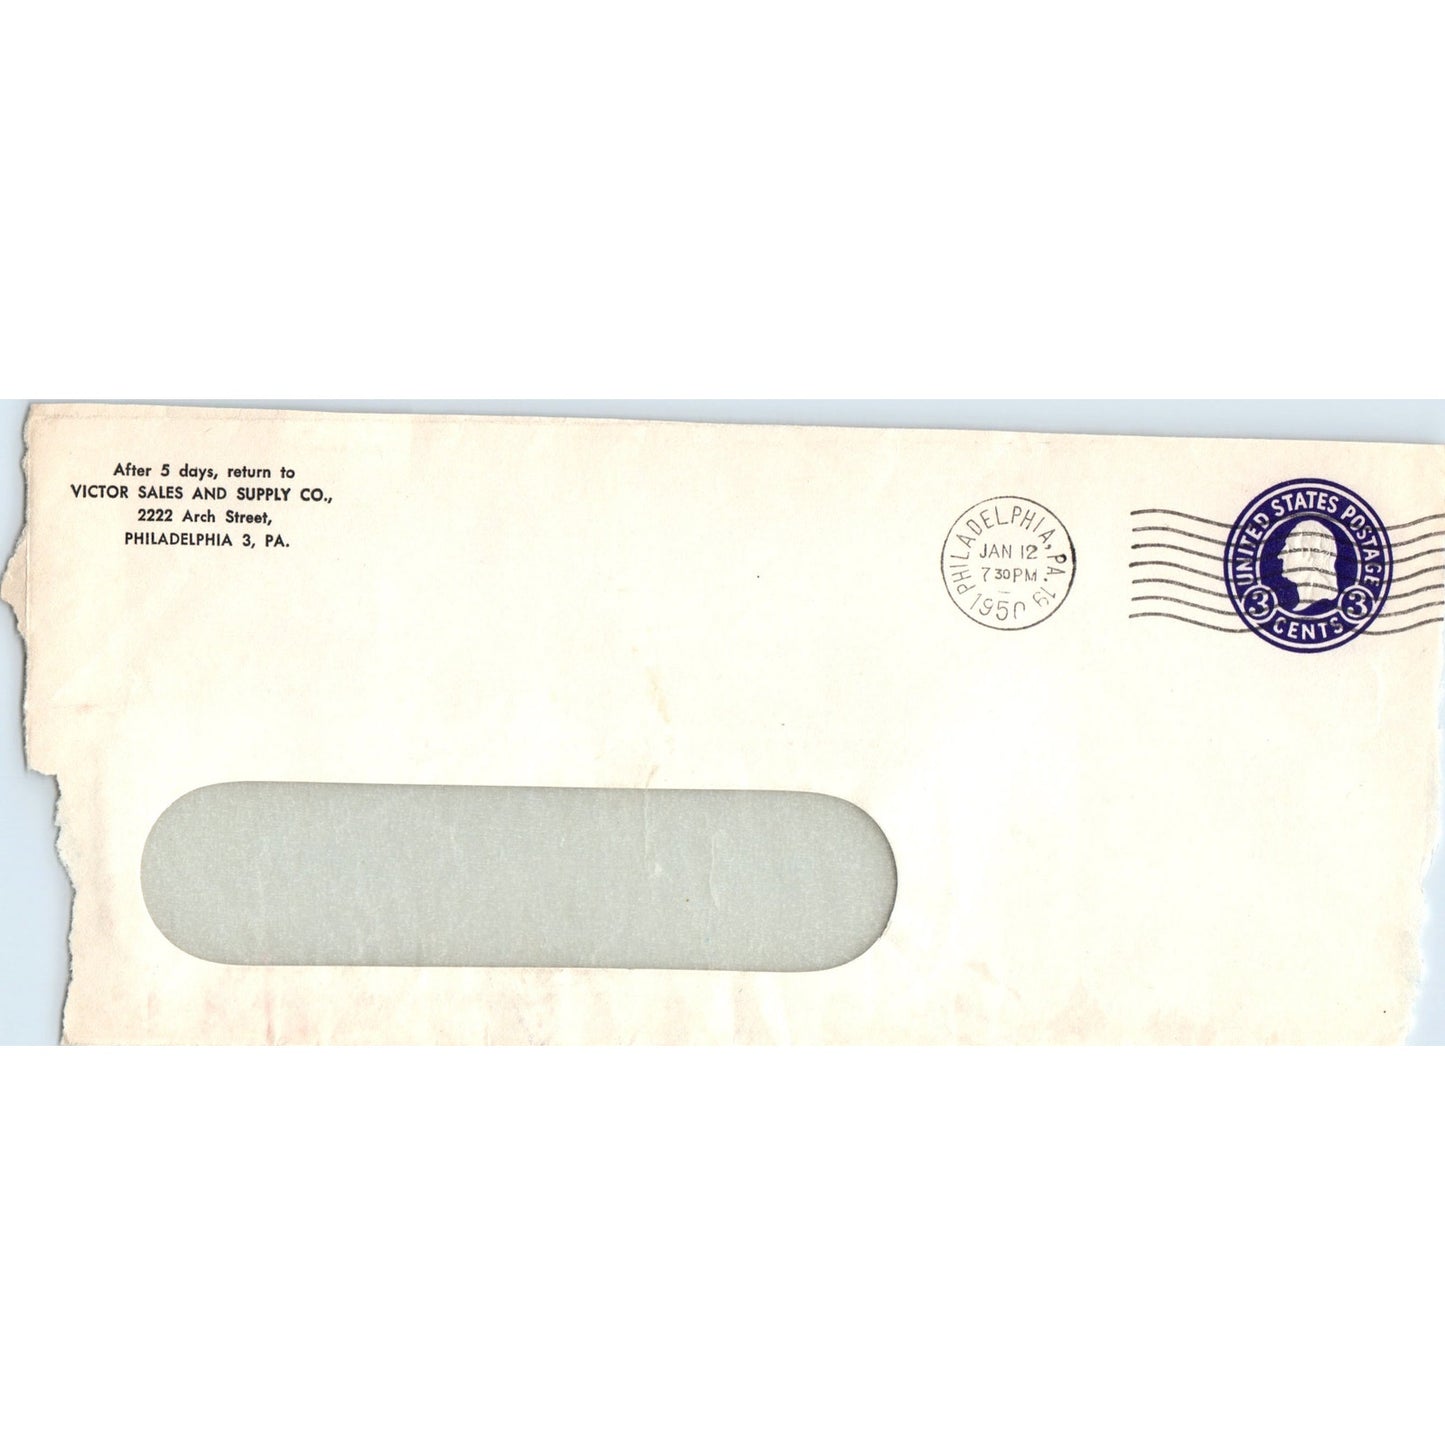 1950 Victor Sales and Supply Co Philadelphia PA Postal Cover Envelope TH9-L2